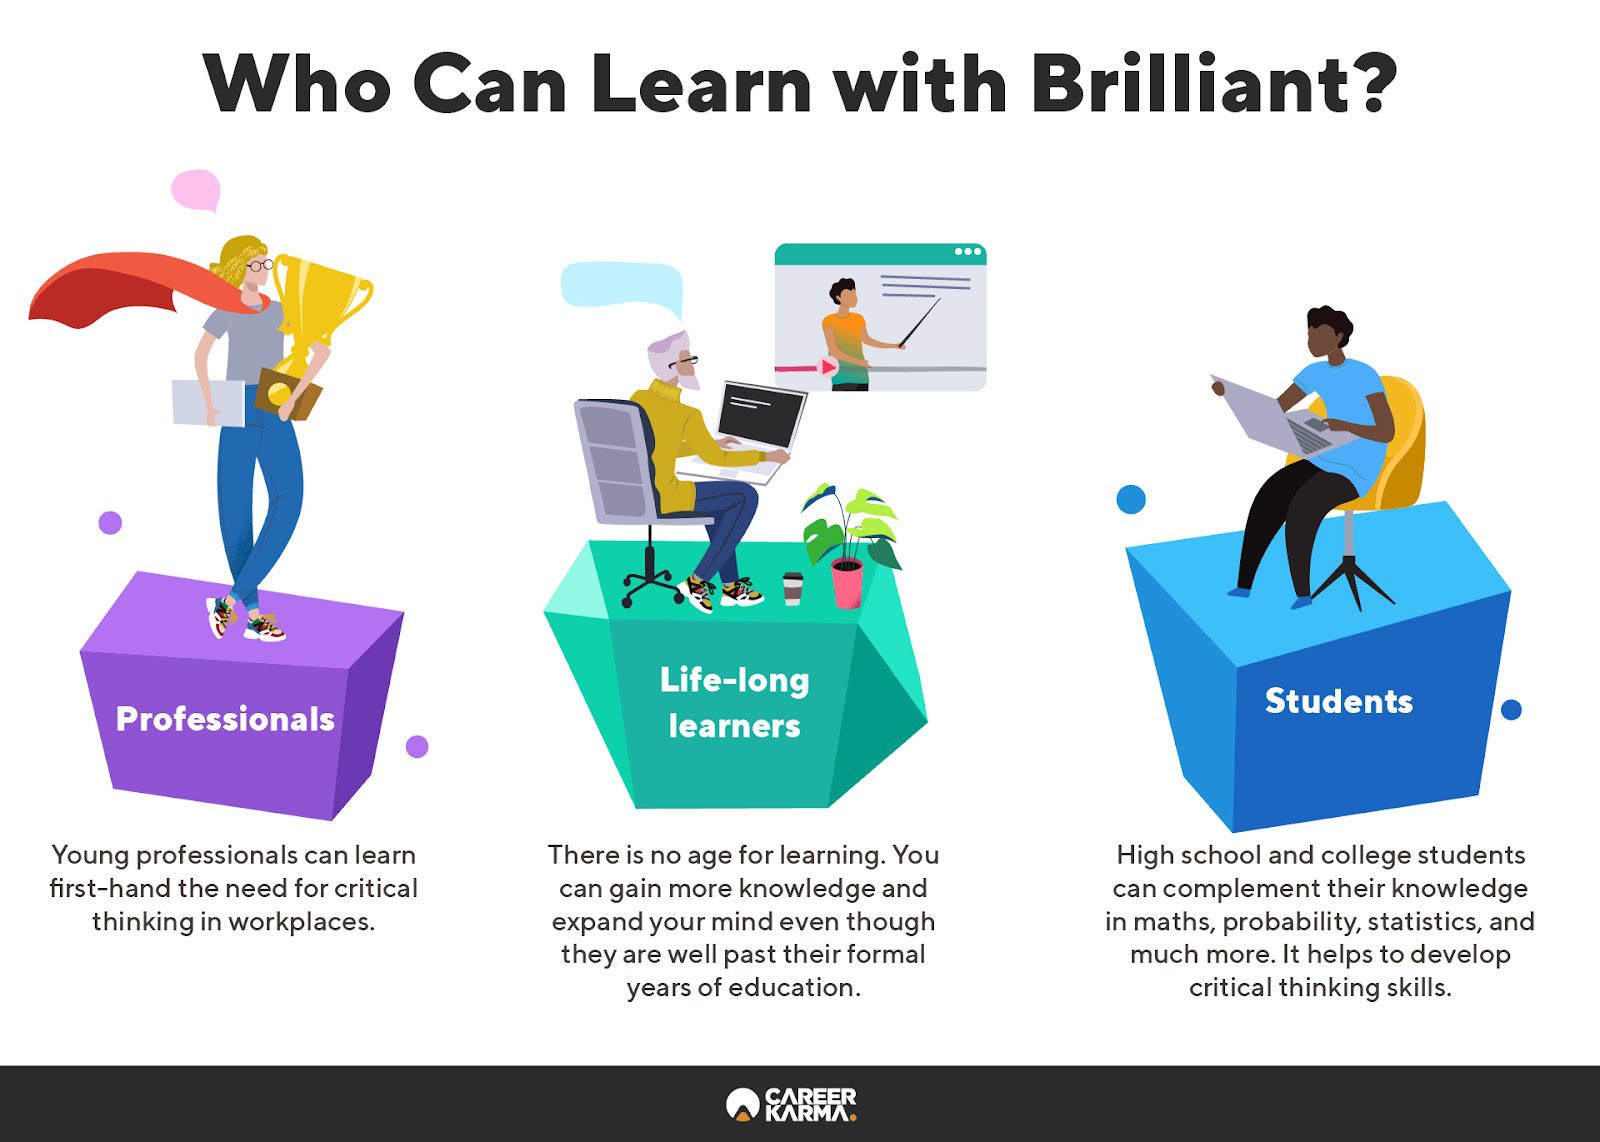 An infographic highlighting the ideal learners of Brilliant 